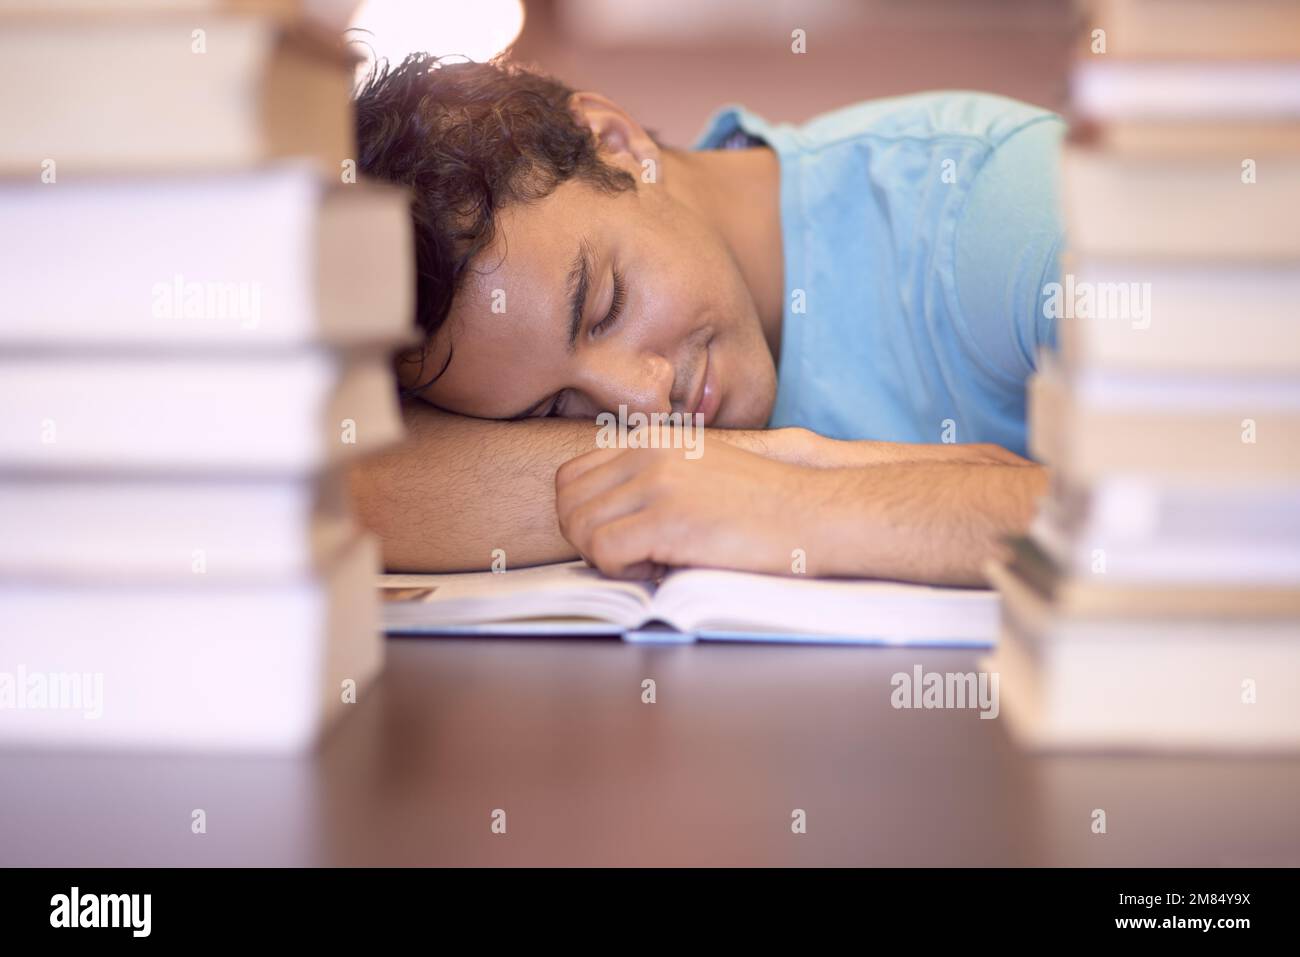 Exam exhaustion. A young student sleeping on his desk after a tiring study session. Stock Photo